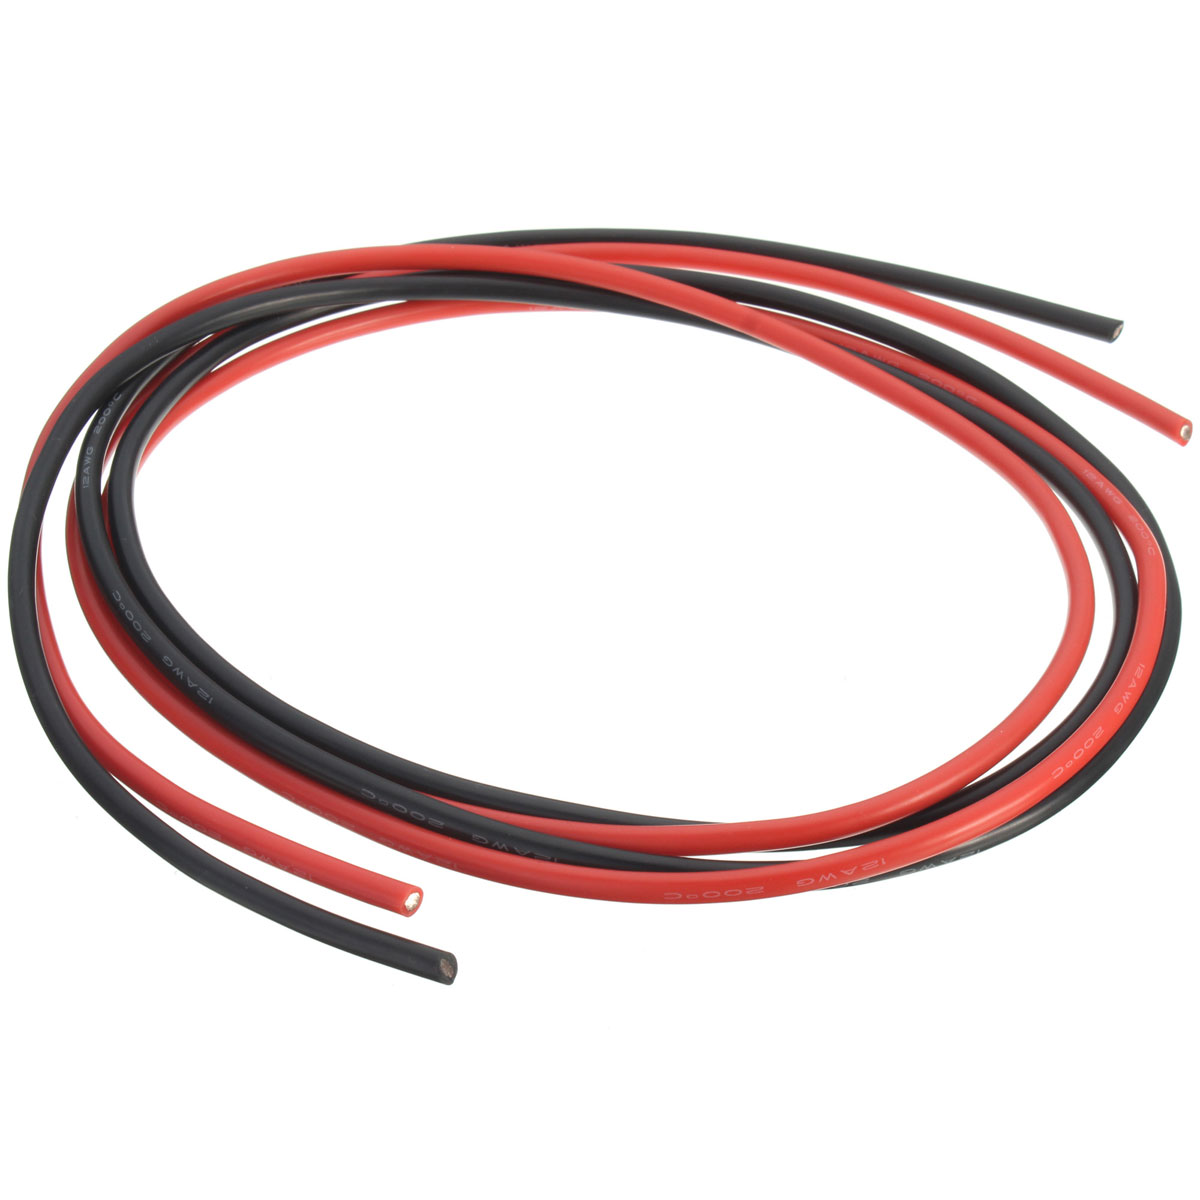 12AWG-3m-Gauge-Silicone-Wire-Flexible-Stranded-BlackRed-Copper-Cable-F-RC-983012-5